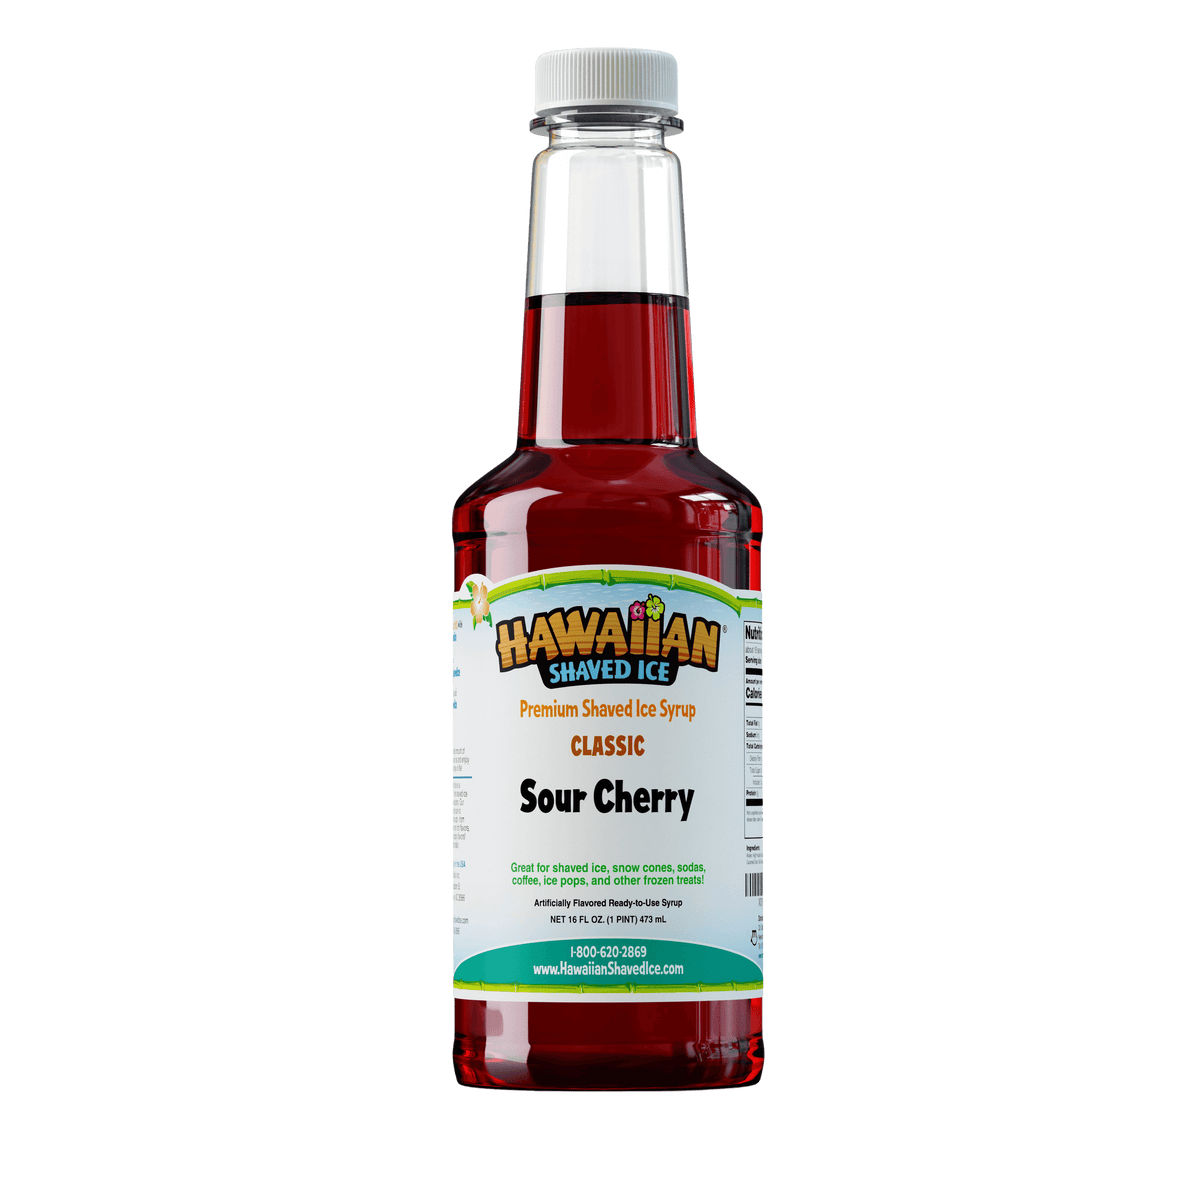 A pint (16-oz) of Hawaiian Shaved Ice Sour Cherry Flavored syrup, Red